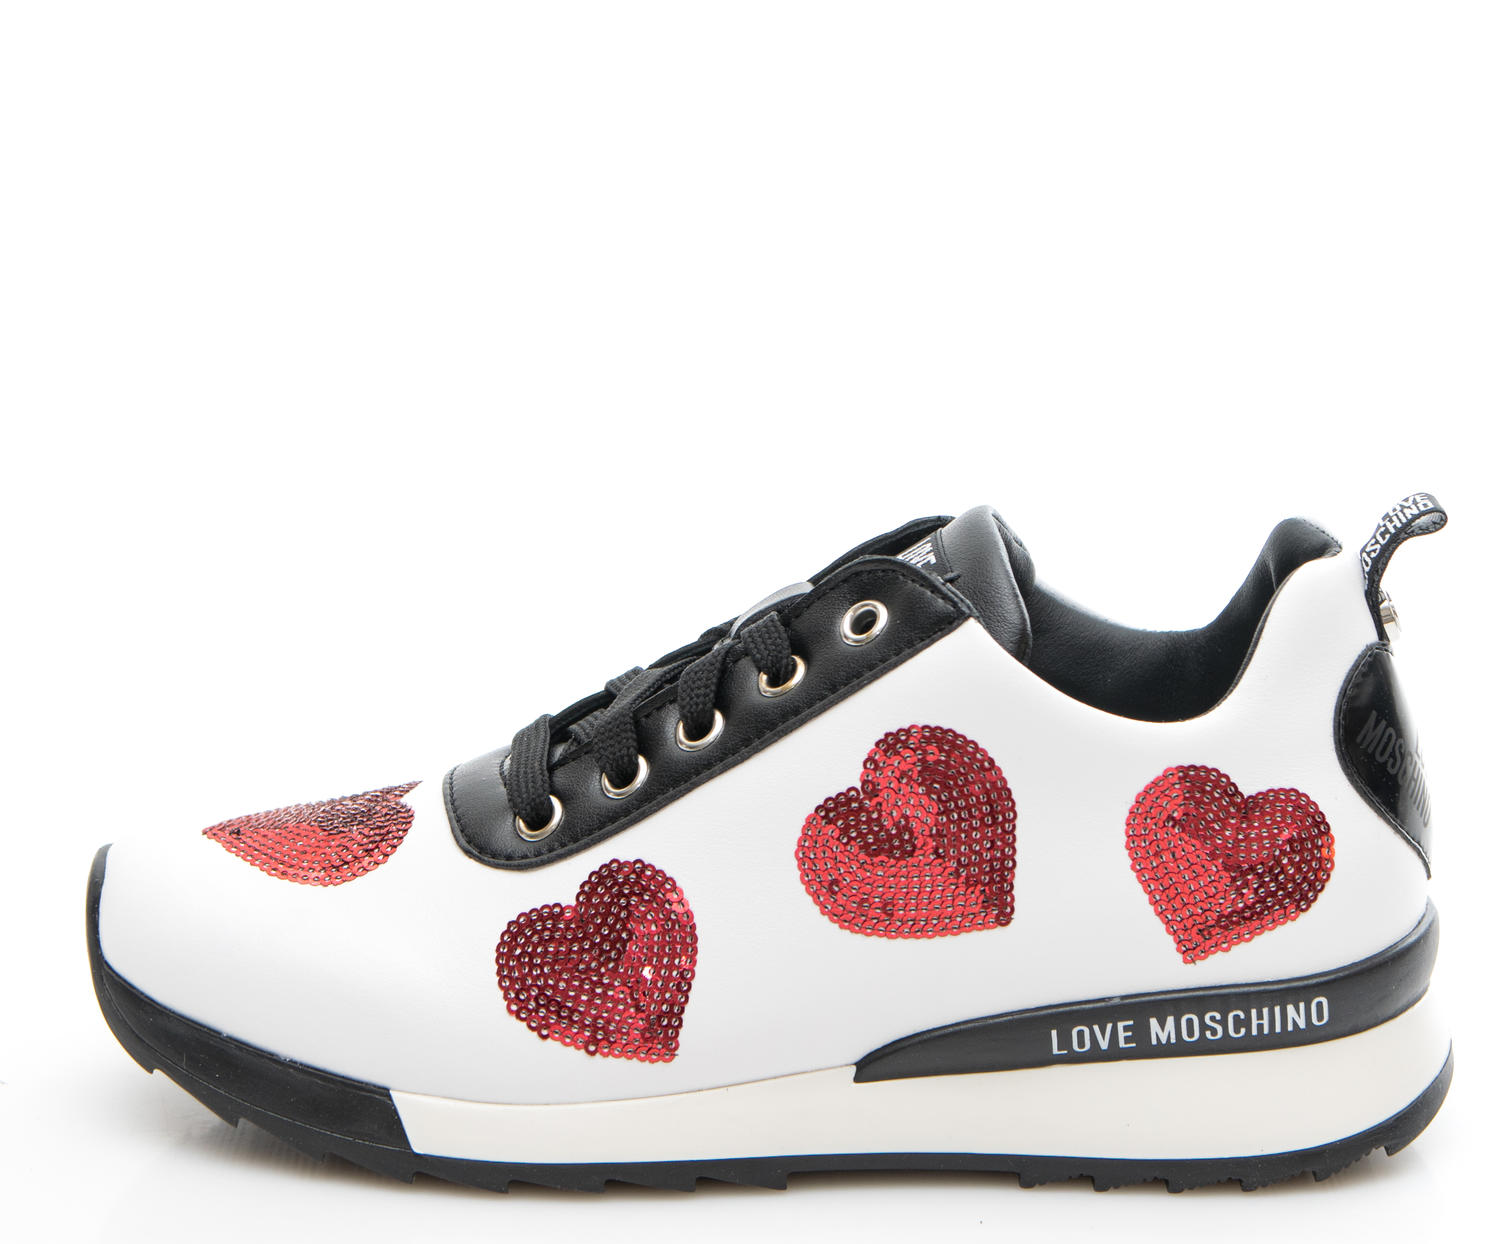 Love Moschino Sneakers White - Shop Online At Best Prices!